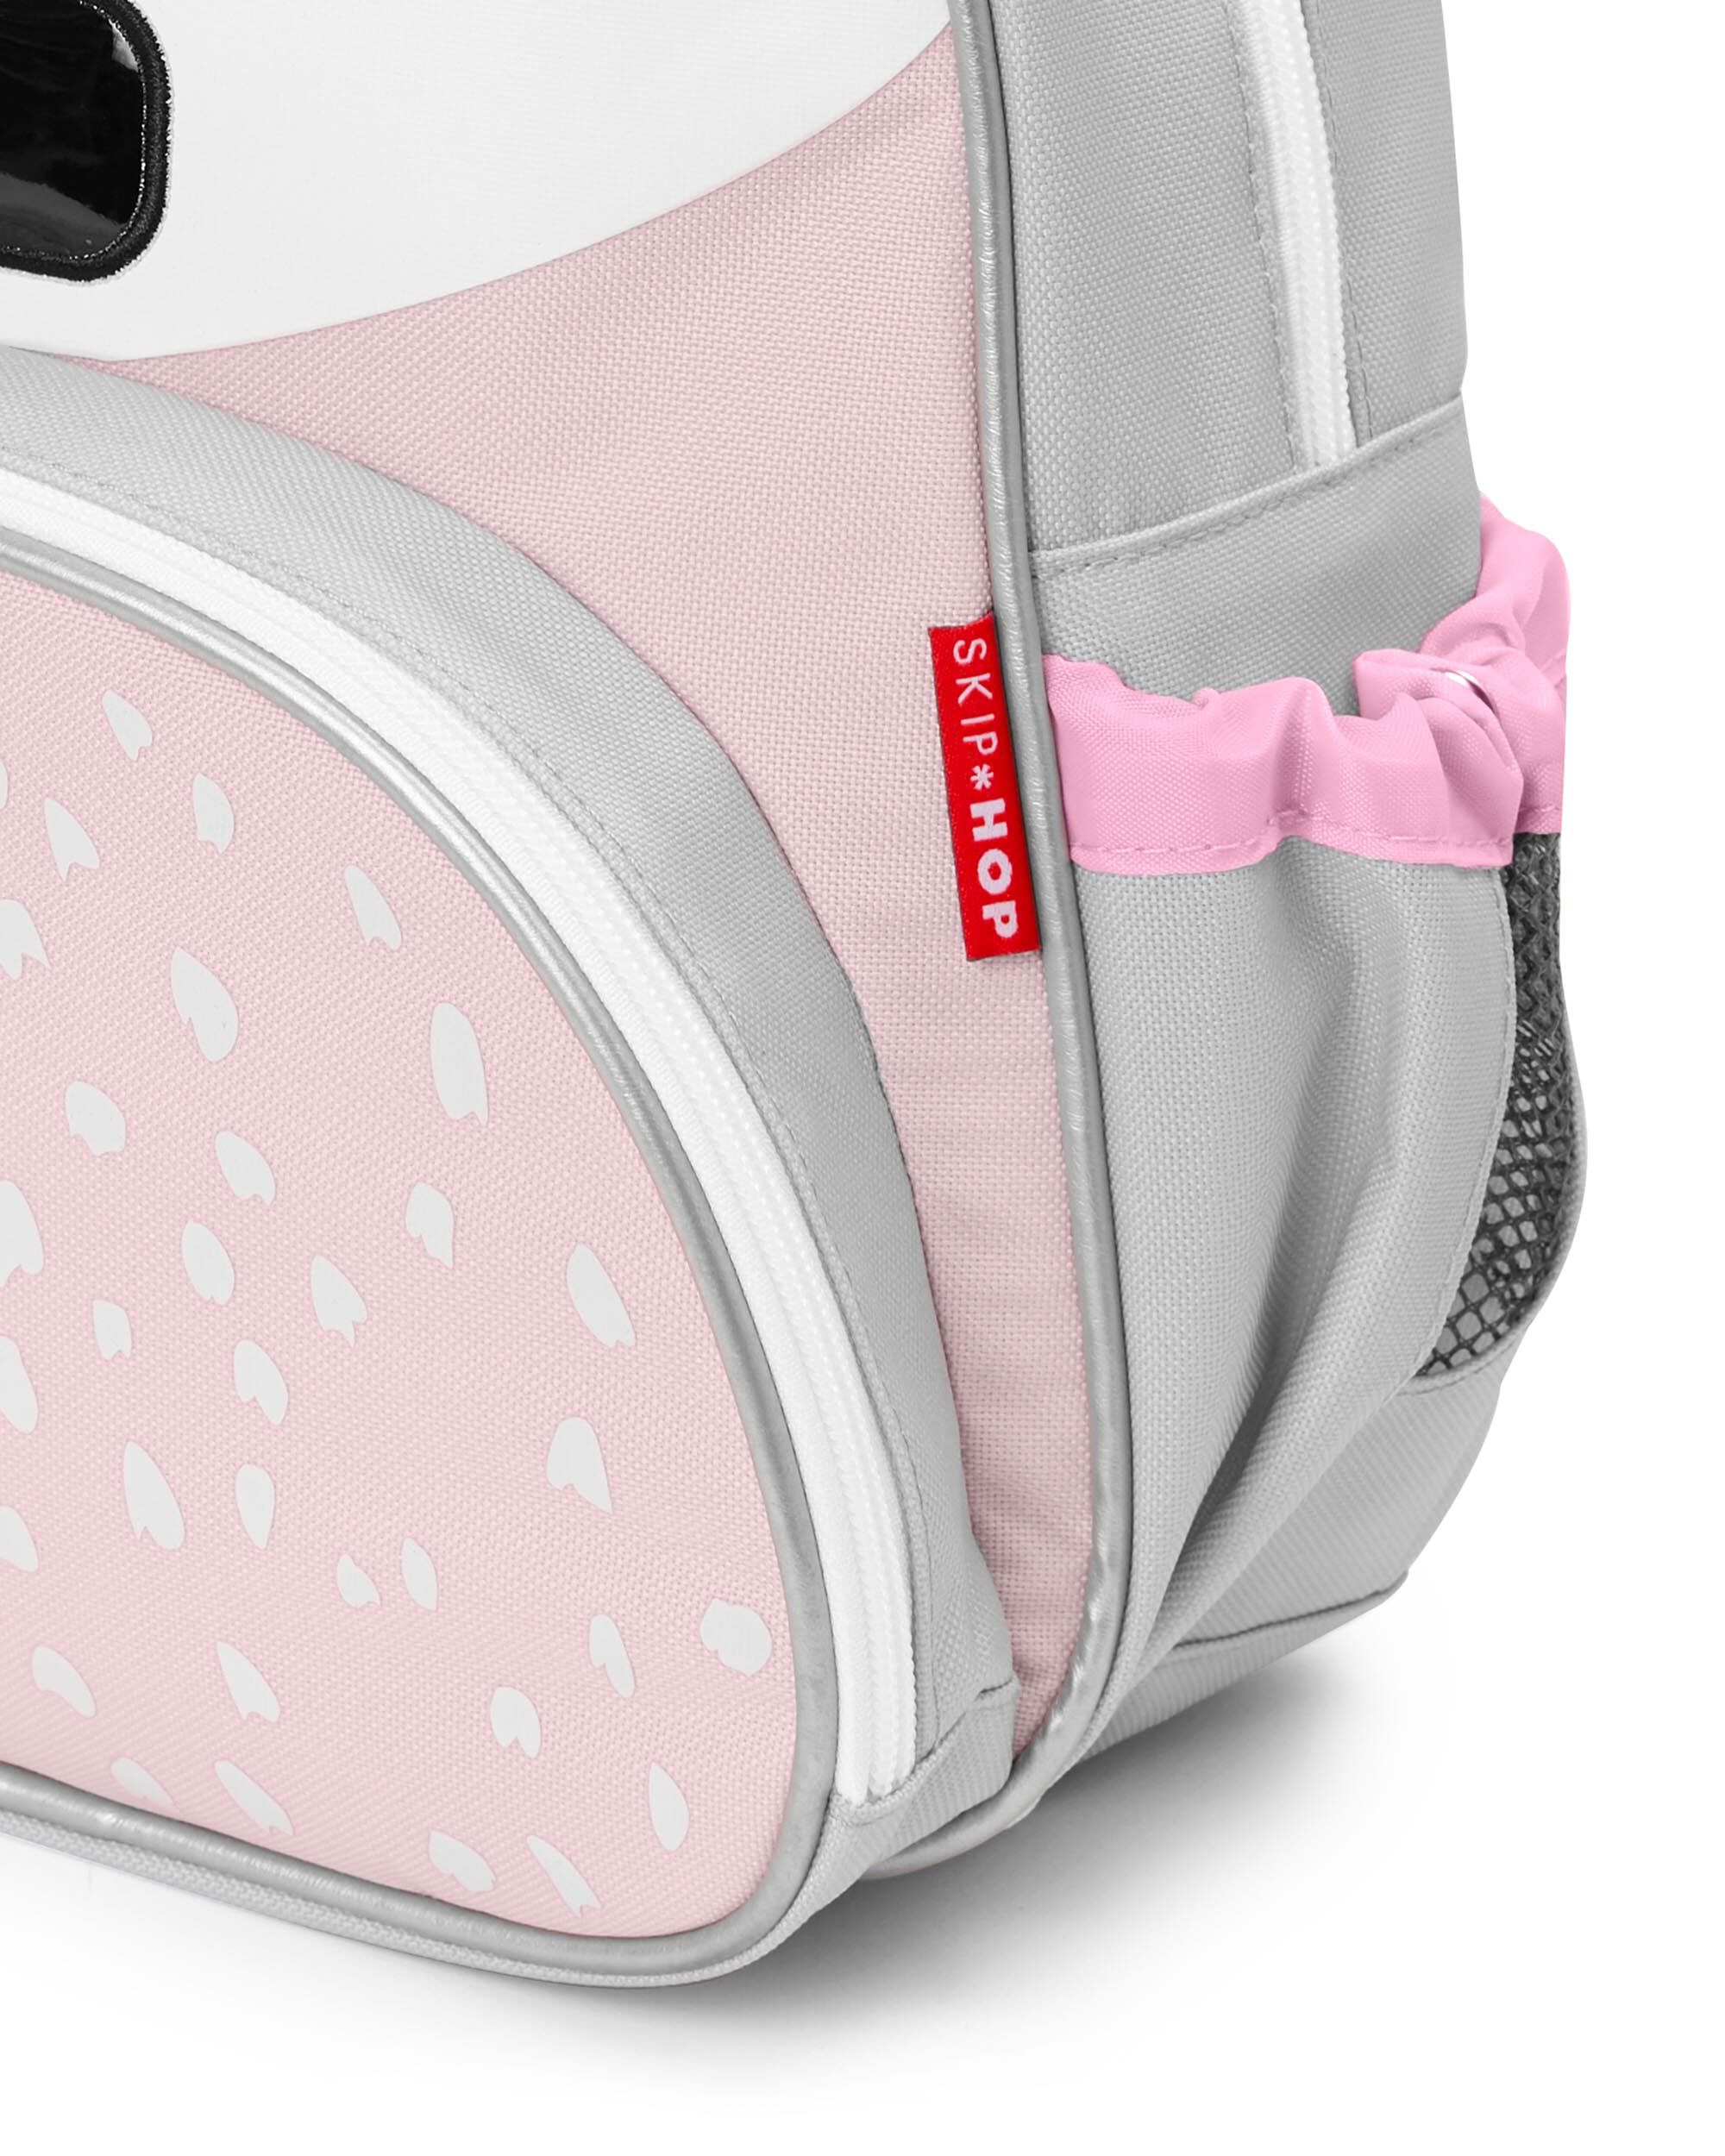 Skip Hop Zoo Mini Backpack With Safety Harness | motherswork Singapore –  Motherswork